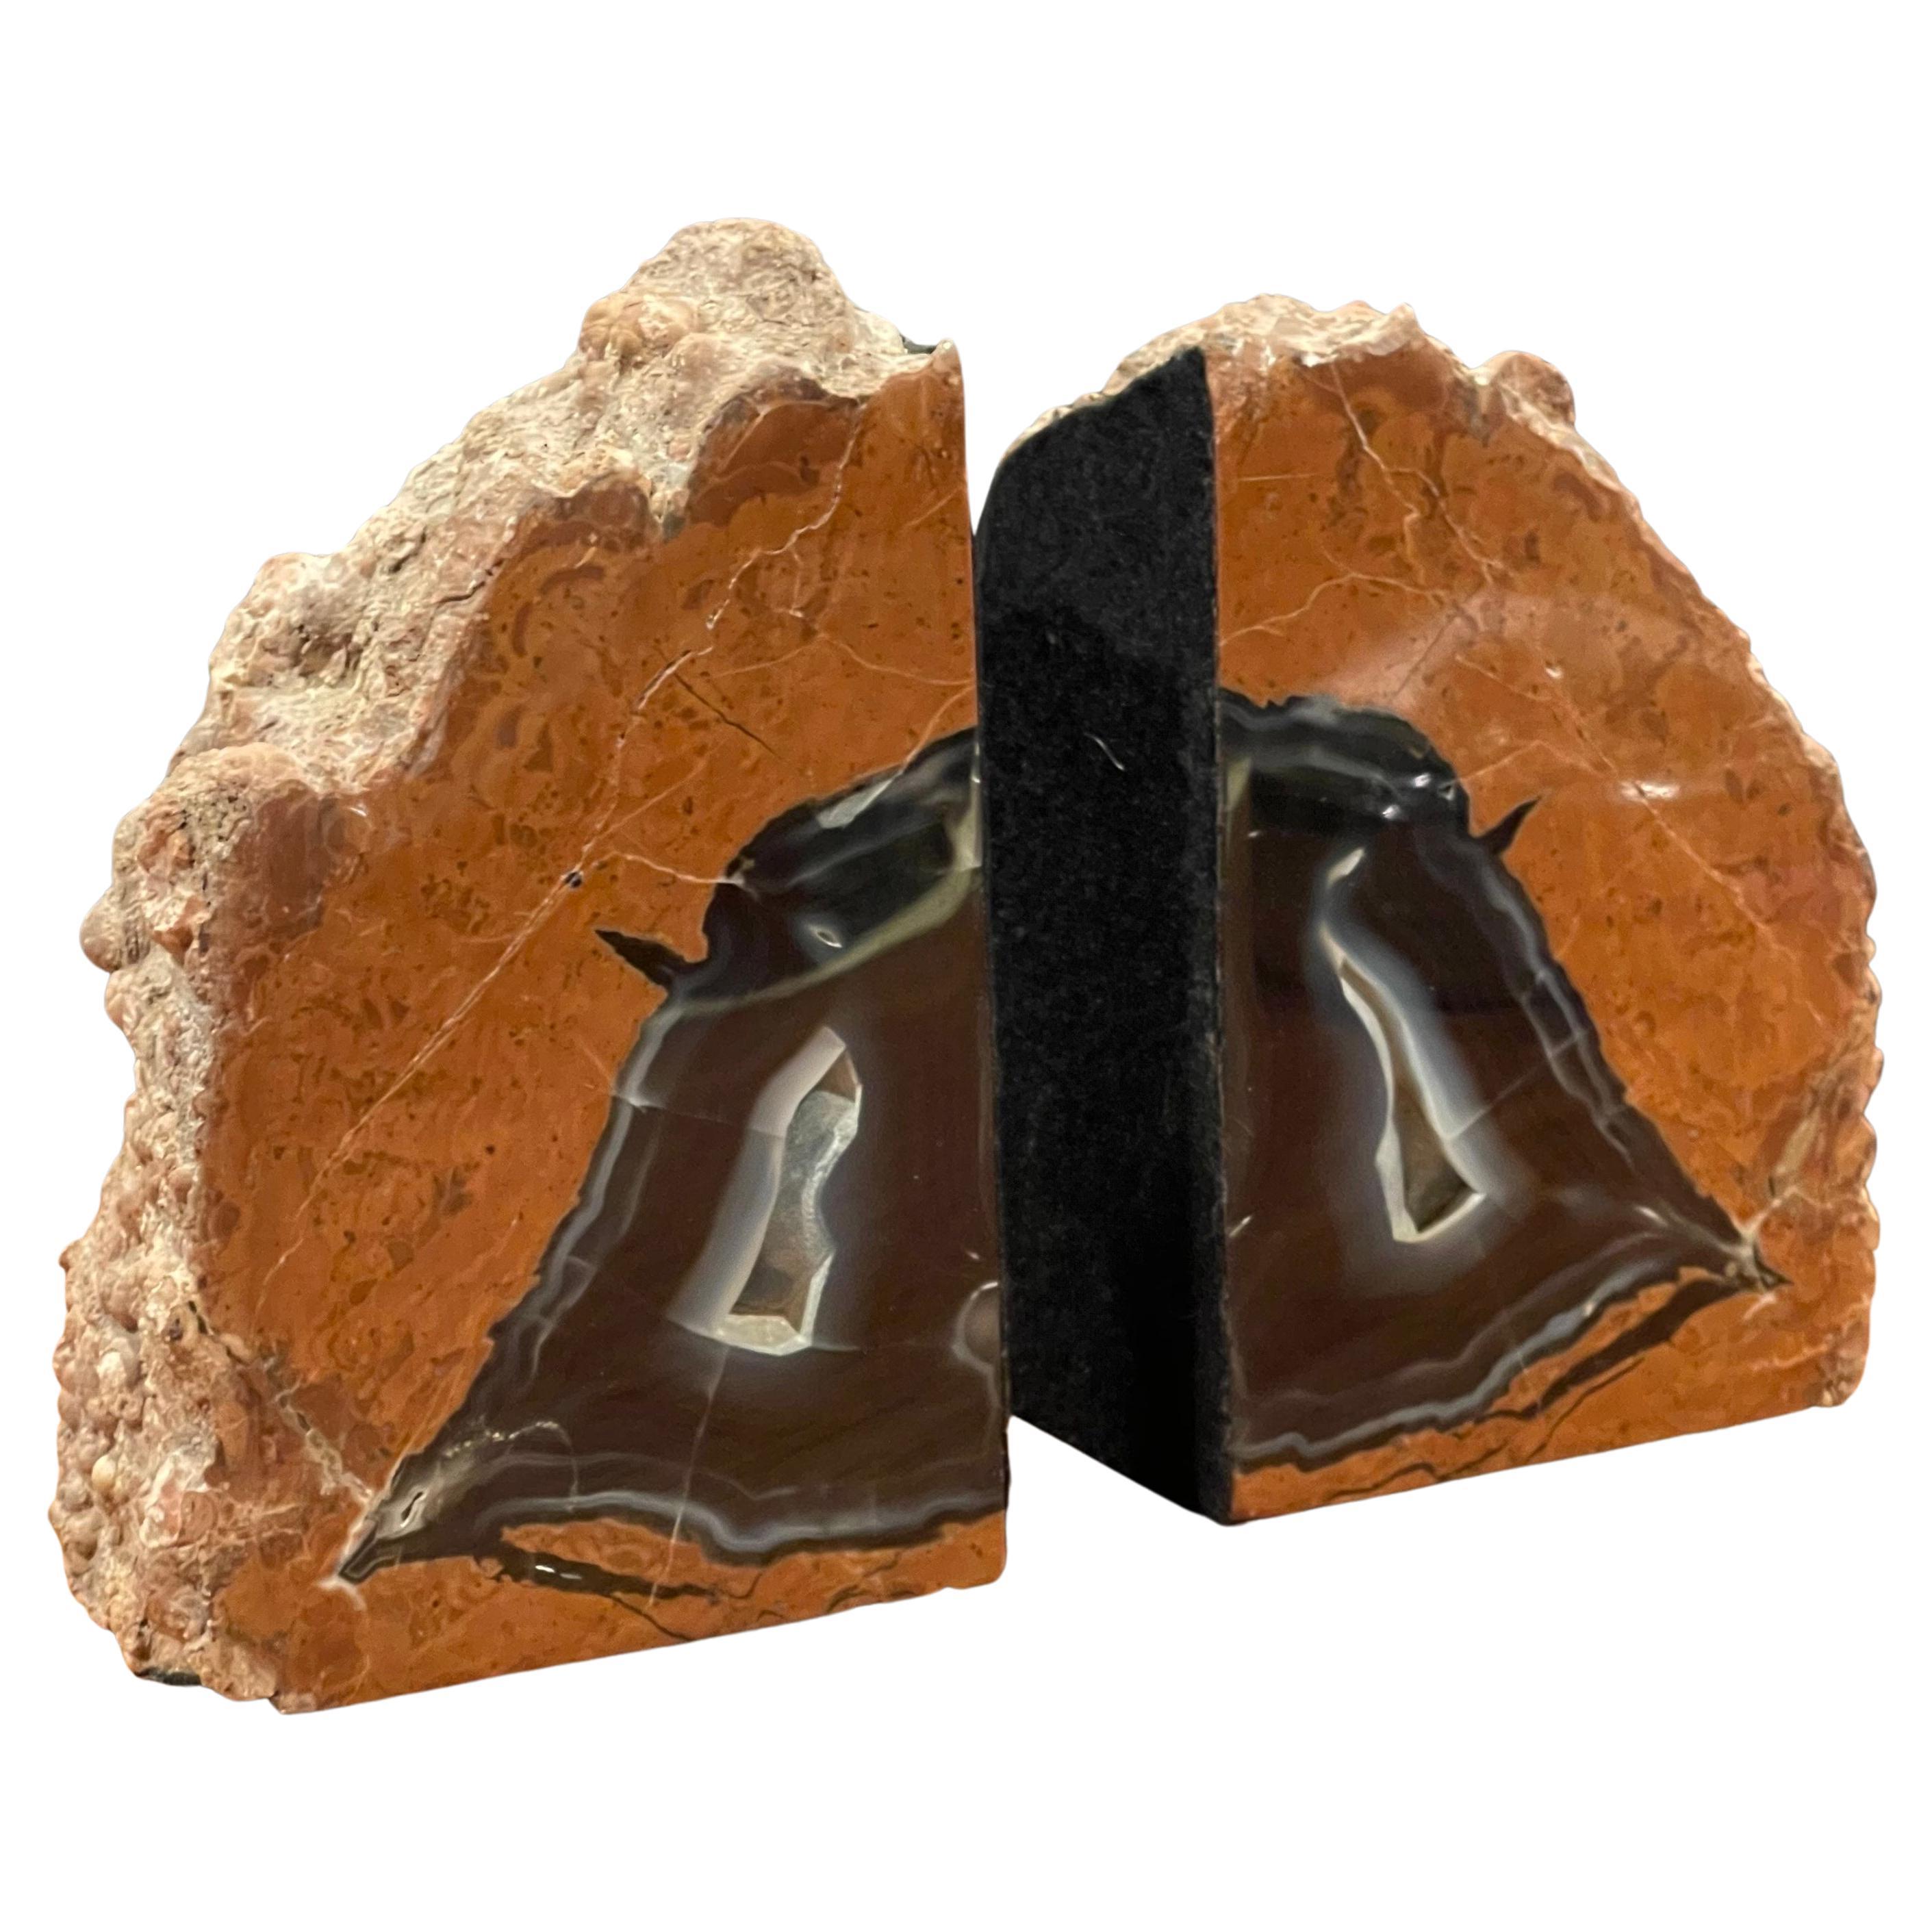 An impressive pair of banded agate bookends, circa pre-history. Brightly colored tan, brown and black tones with naturally formed patterns caused by fossilization over millions of years. Finished with a highly polished surface, the exterior edges